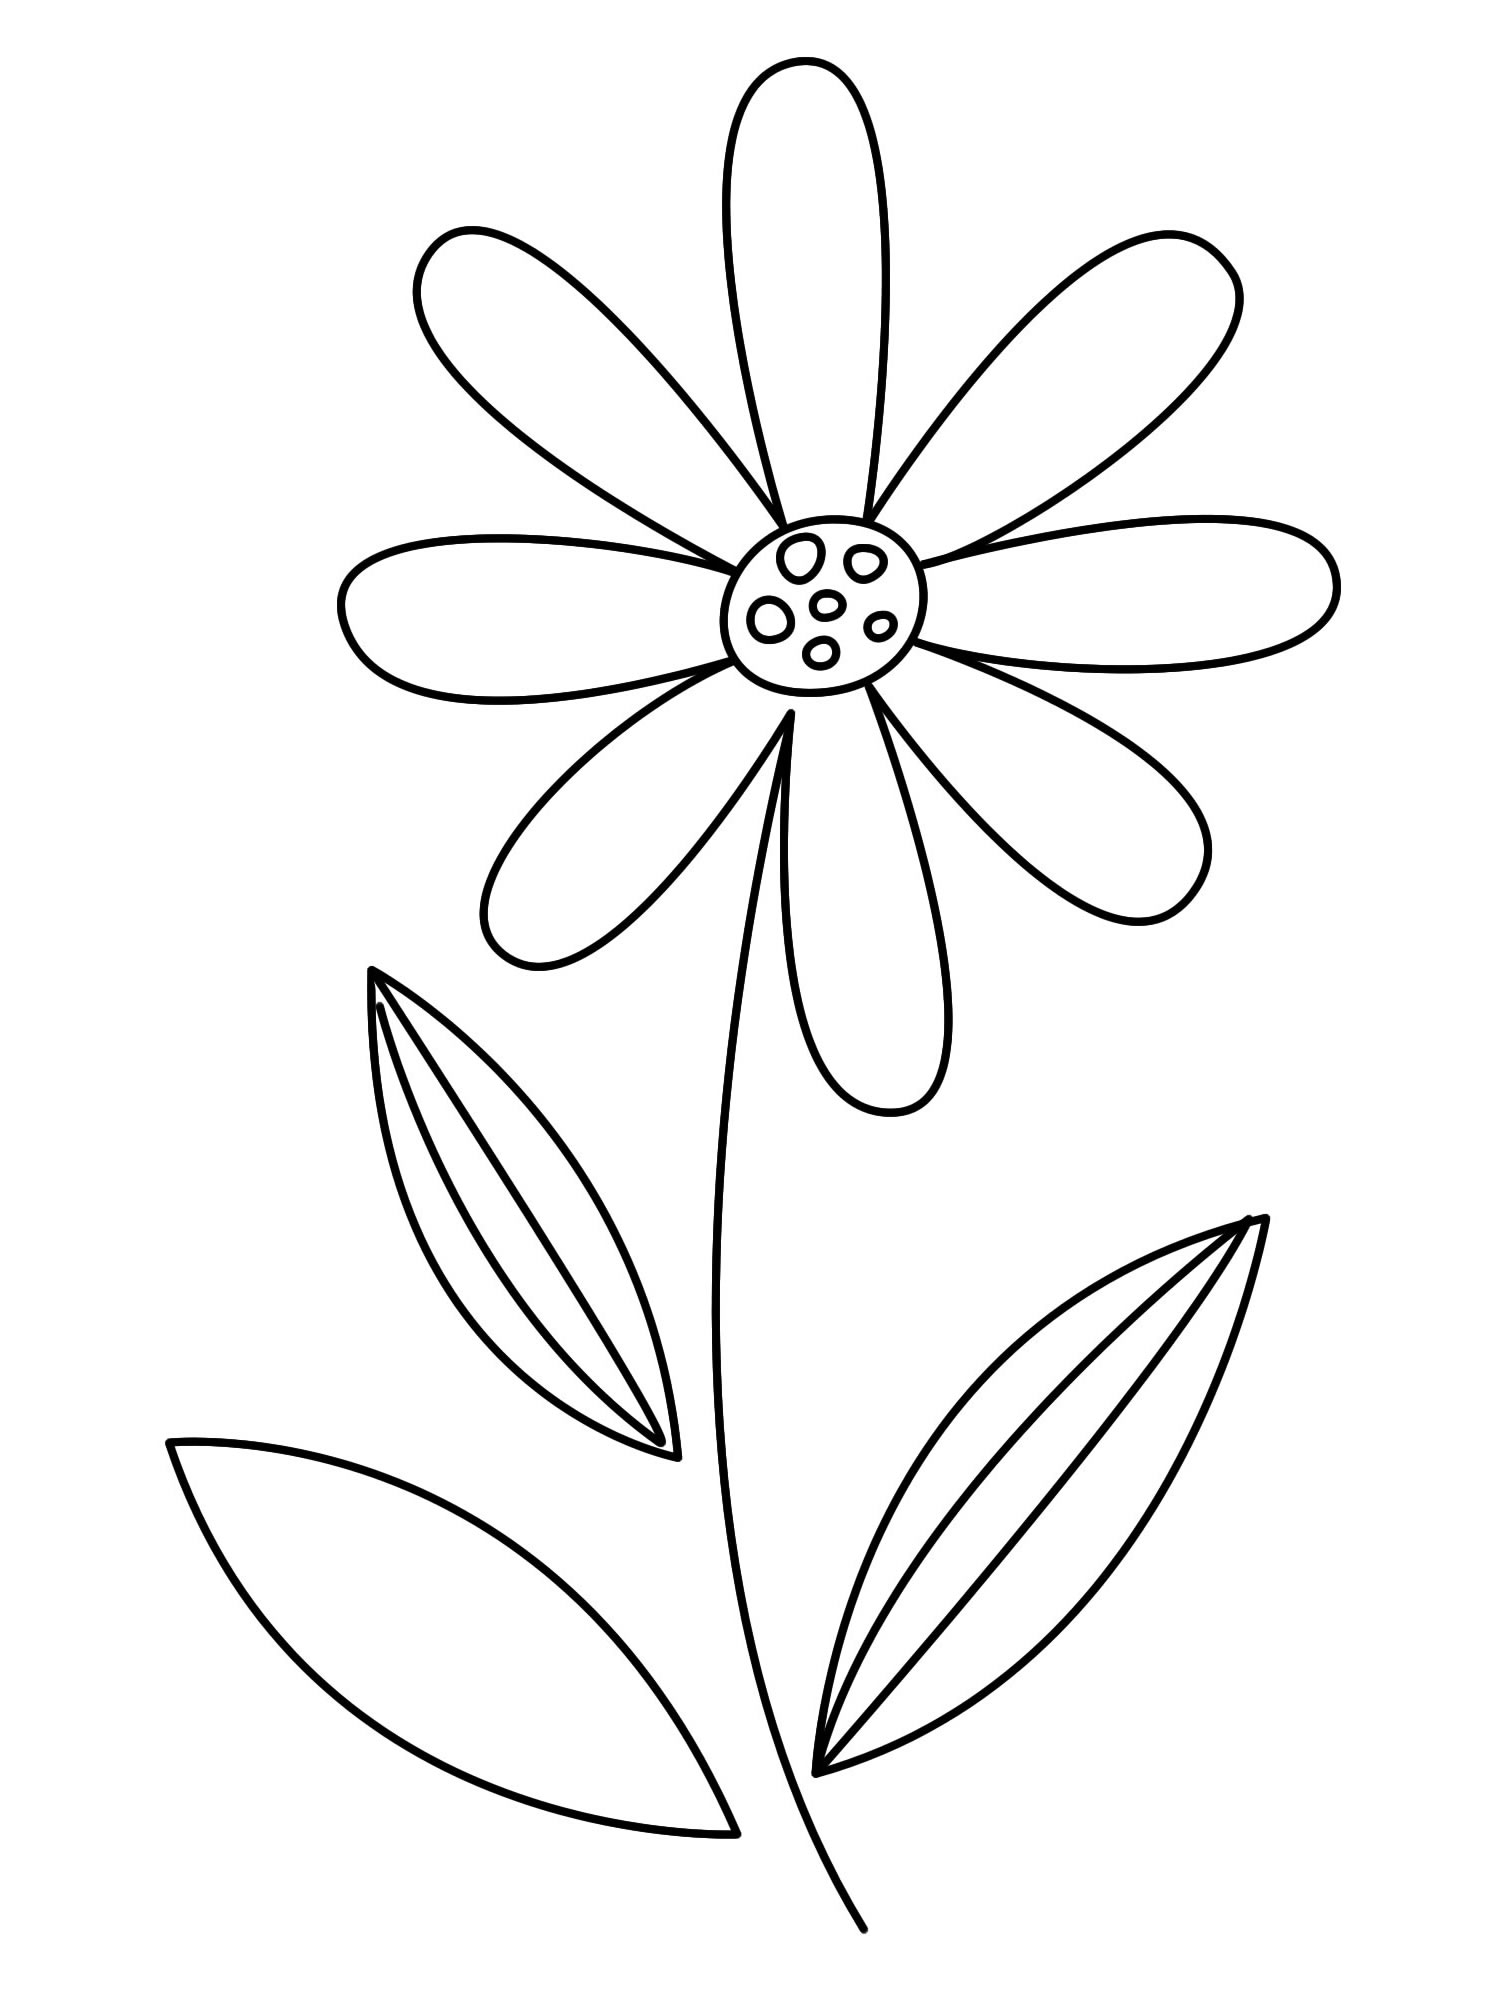 Exciting chamomile coloring book for 3-4 year olds